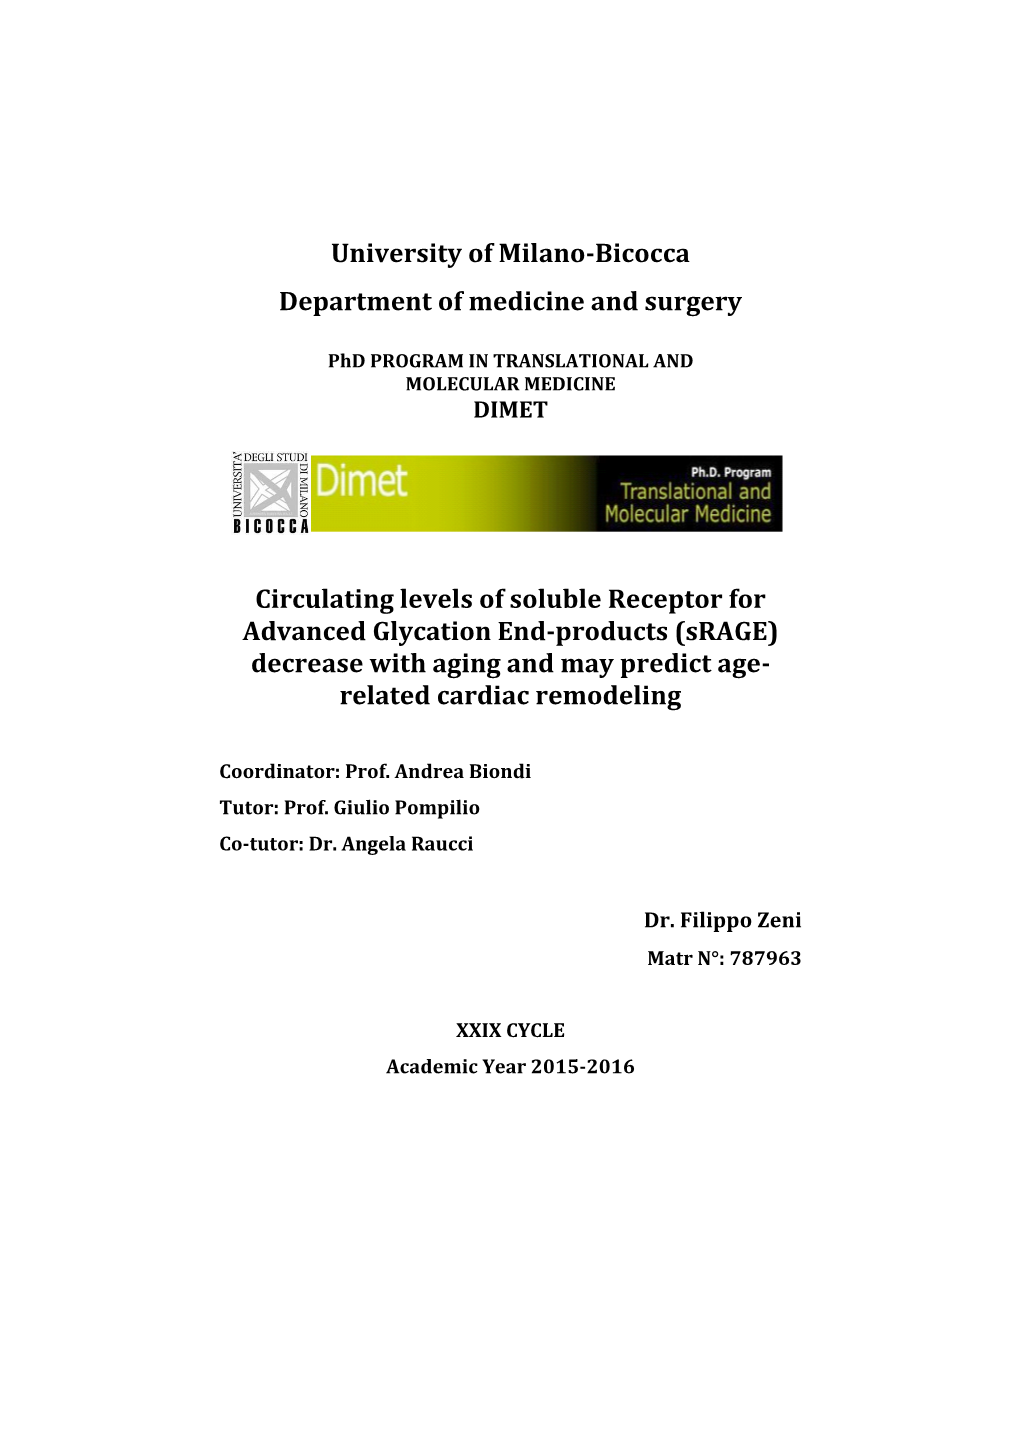 University of Milano-Bicocca Department of Medicine and Surgery Circulating Levels of Soluble Receptor for Advanced Glycation En